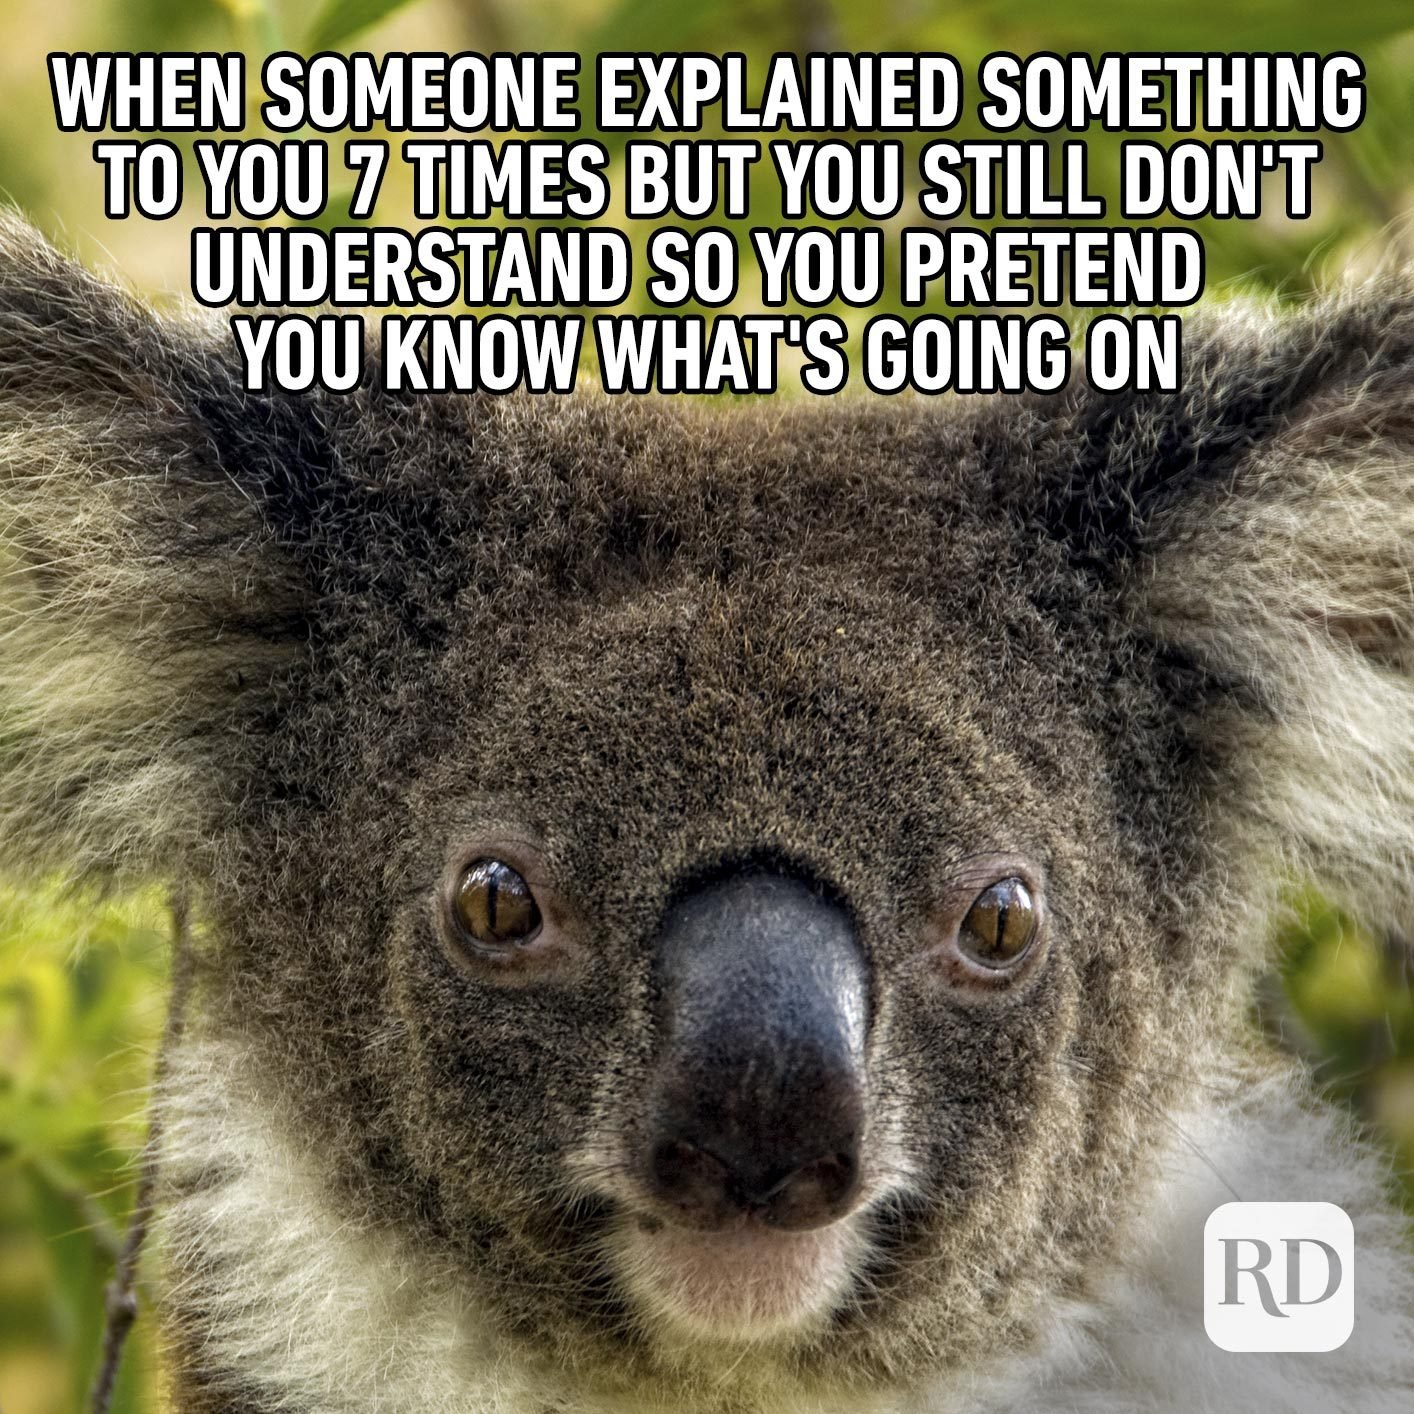 Image of Koala. Meme text: When someone explained something to you seven times but you still don't understand so you pretend to know what's going on.